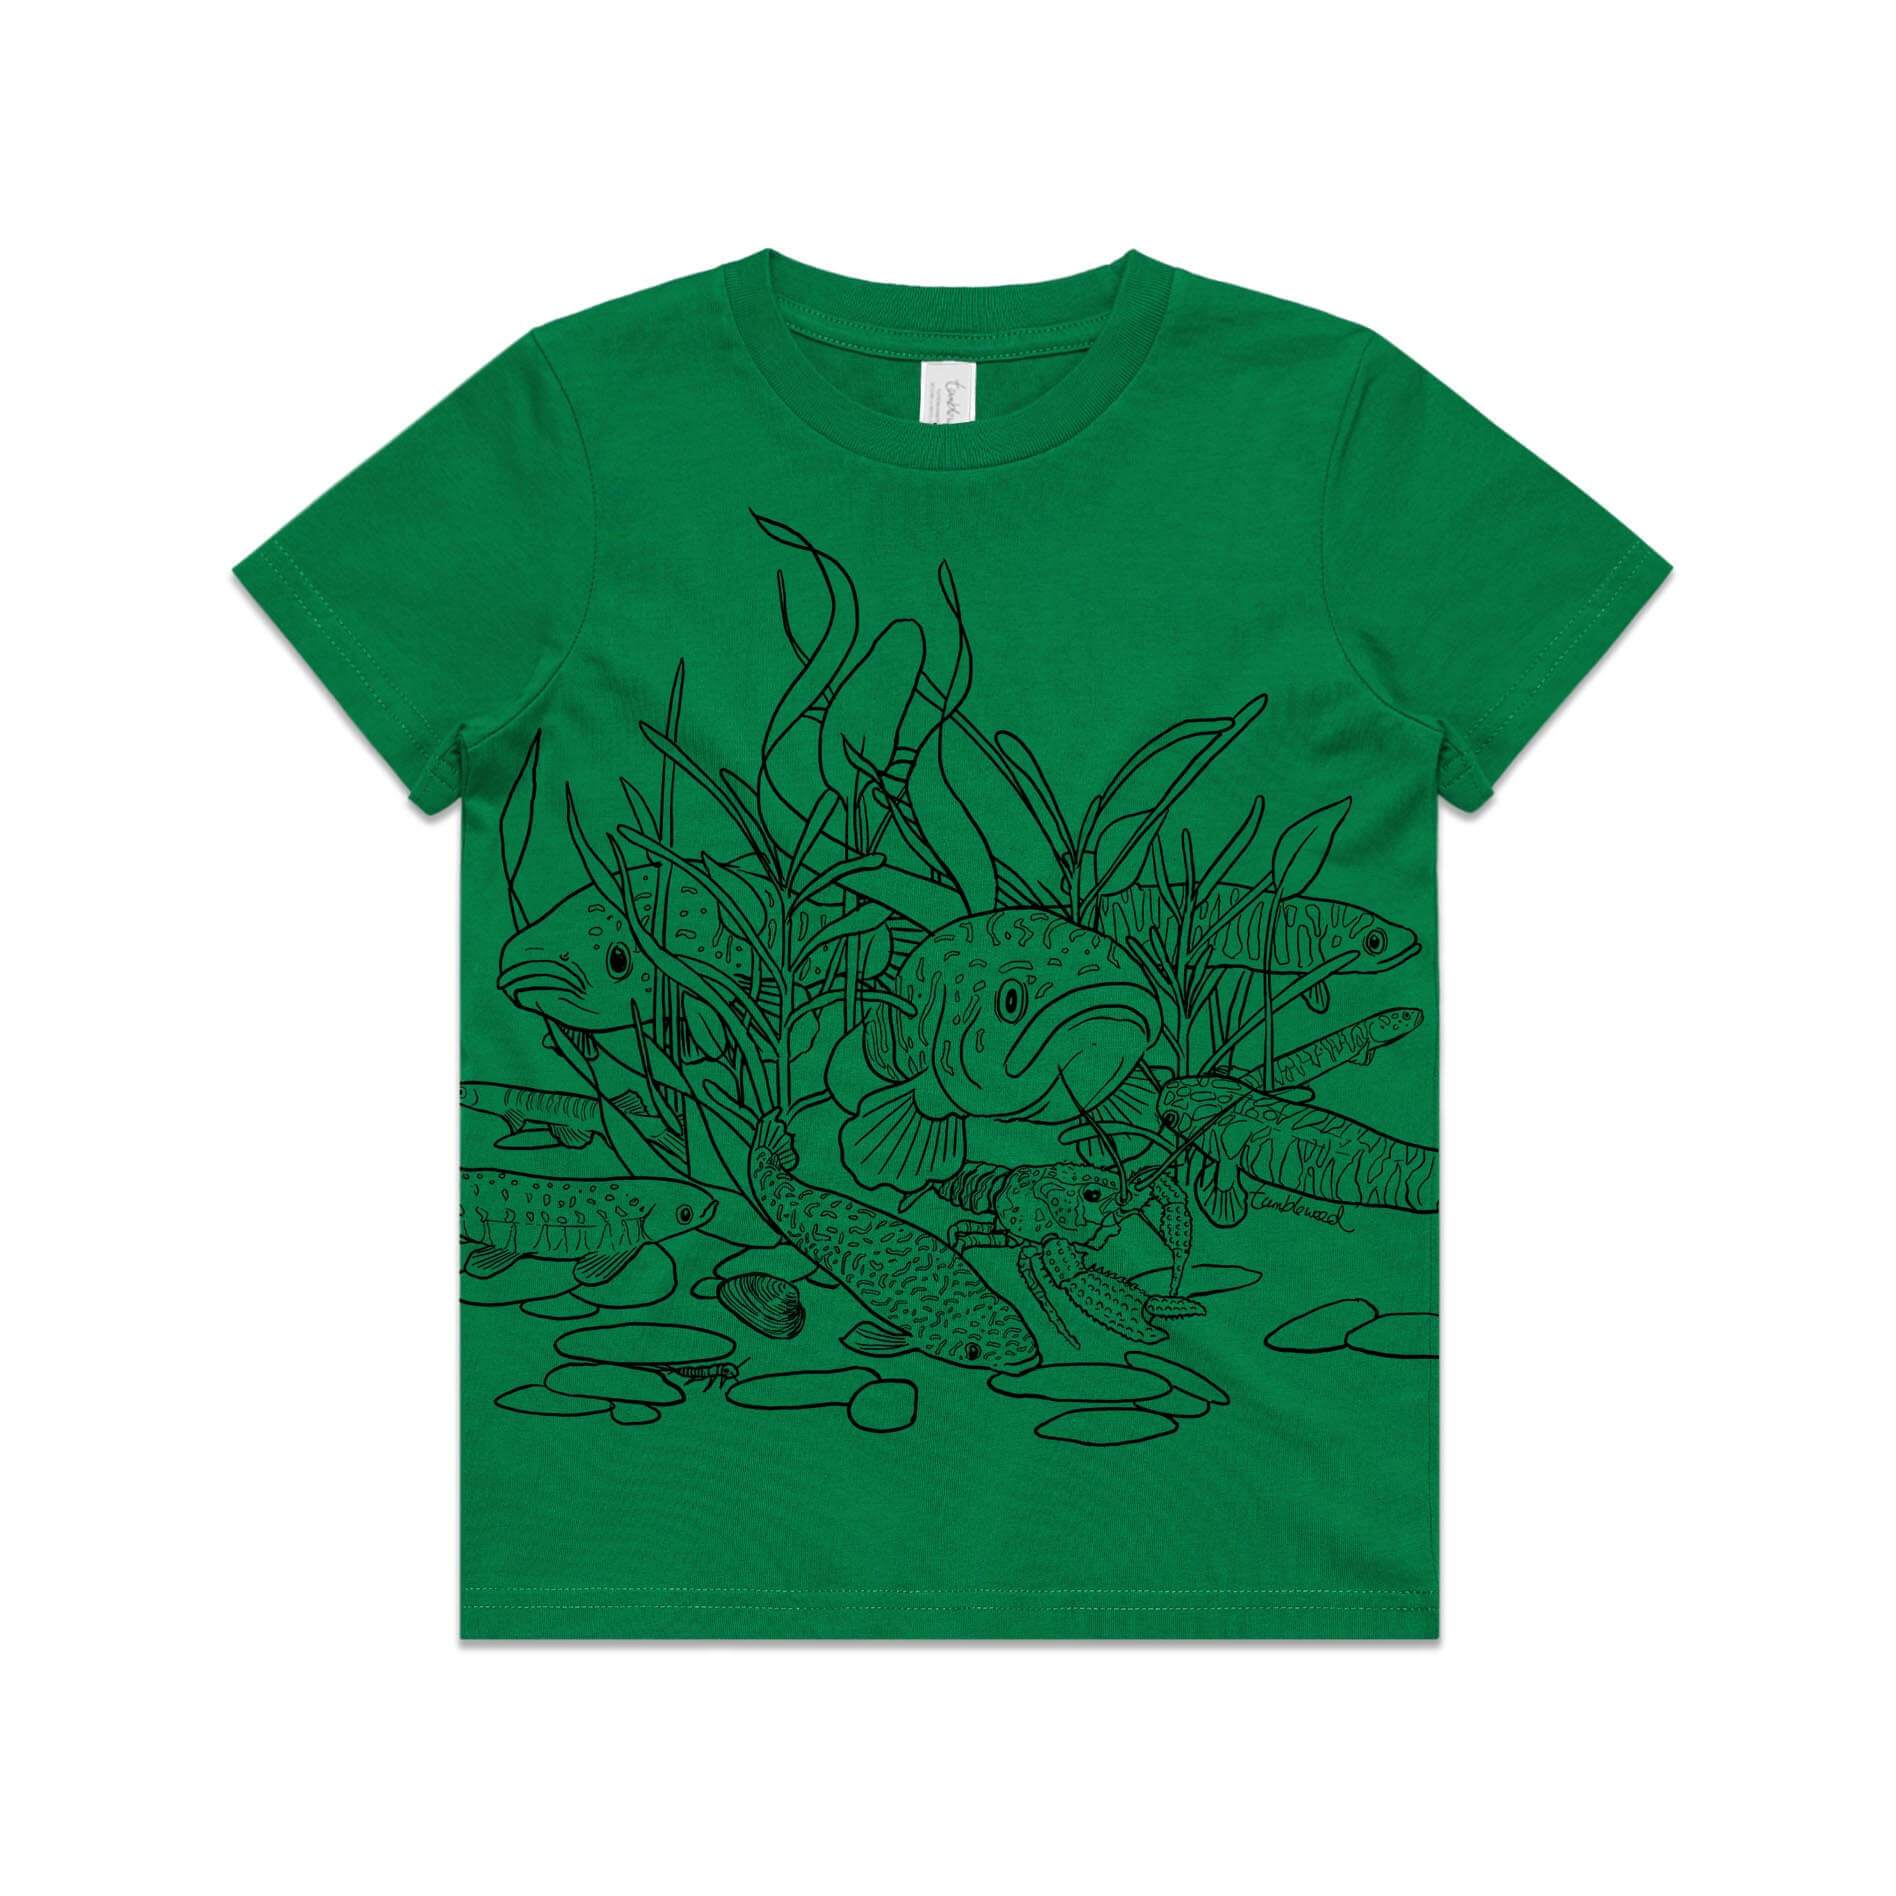 Green, cotton kids' t-shirt with screen printed freshwater fish design.